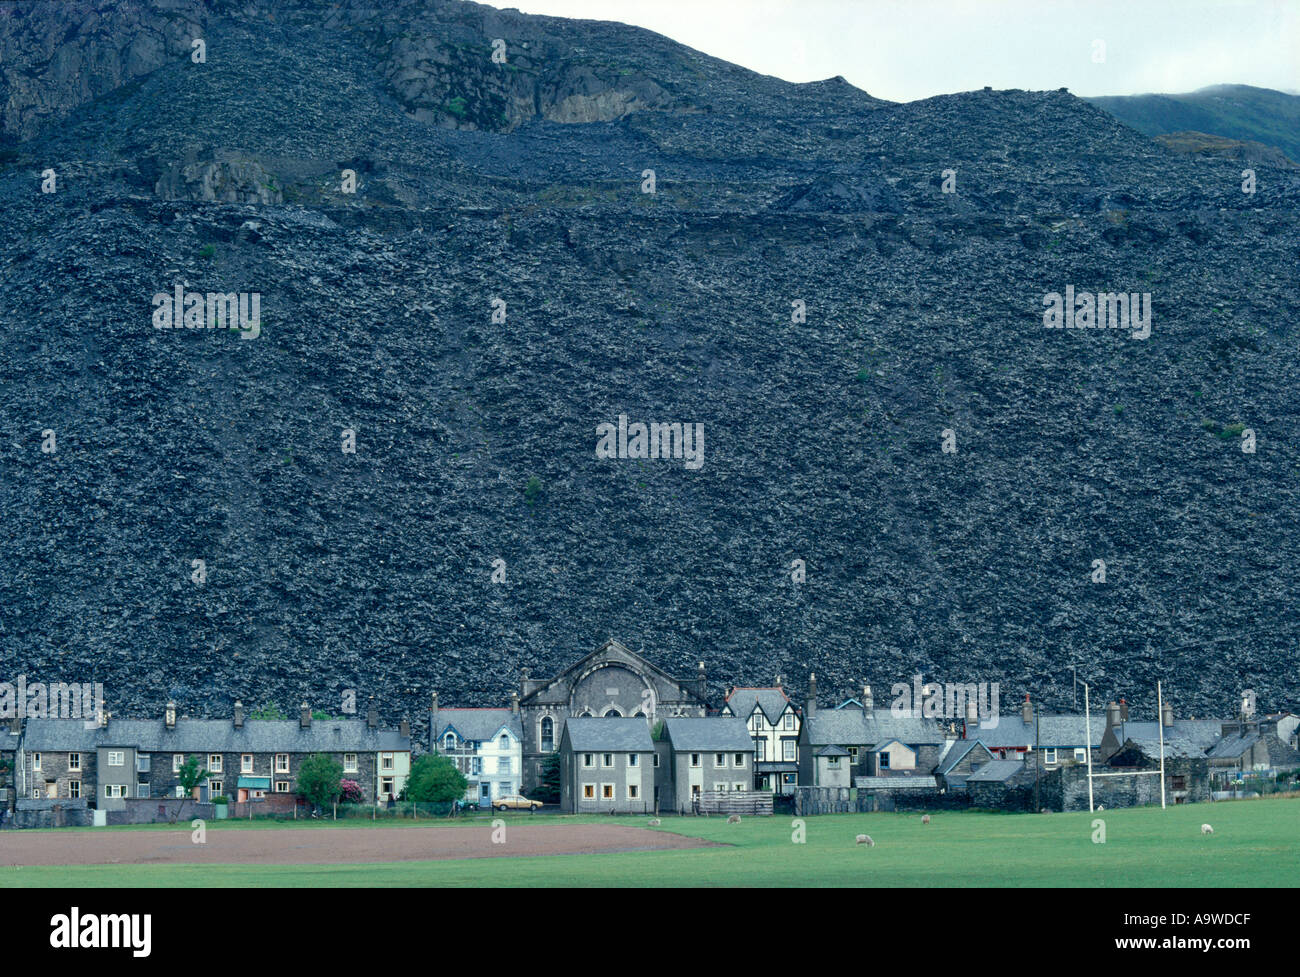 Mining Community at the base of a Quarry in North Wales, UK Stock Photo